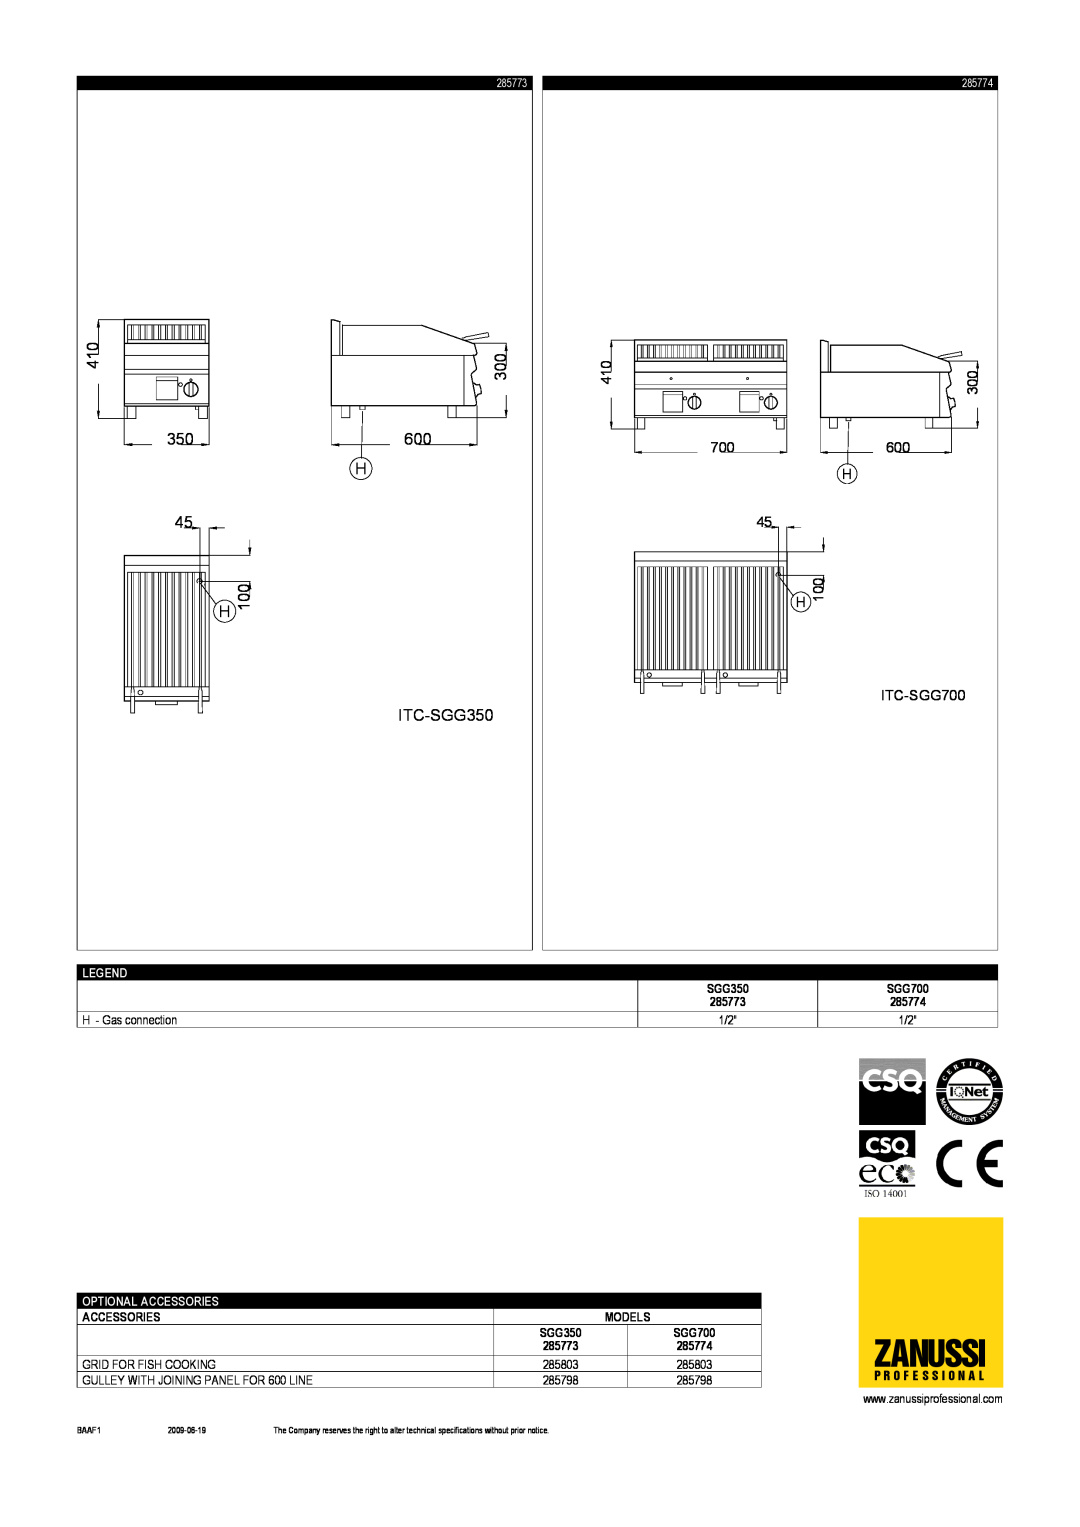 Zanussi 285773 Zanussi, ITC-SGG700, H - Gas connection, Optional Accessories, Models, Grid For Fish Cooking, SGG350 